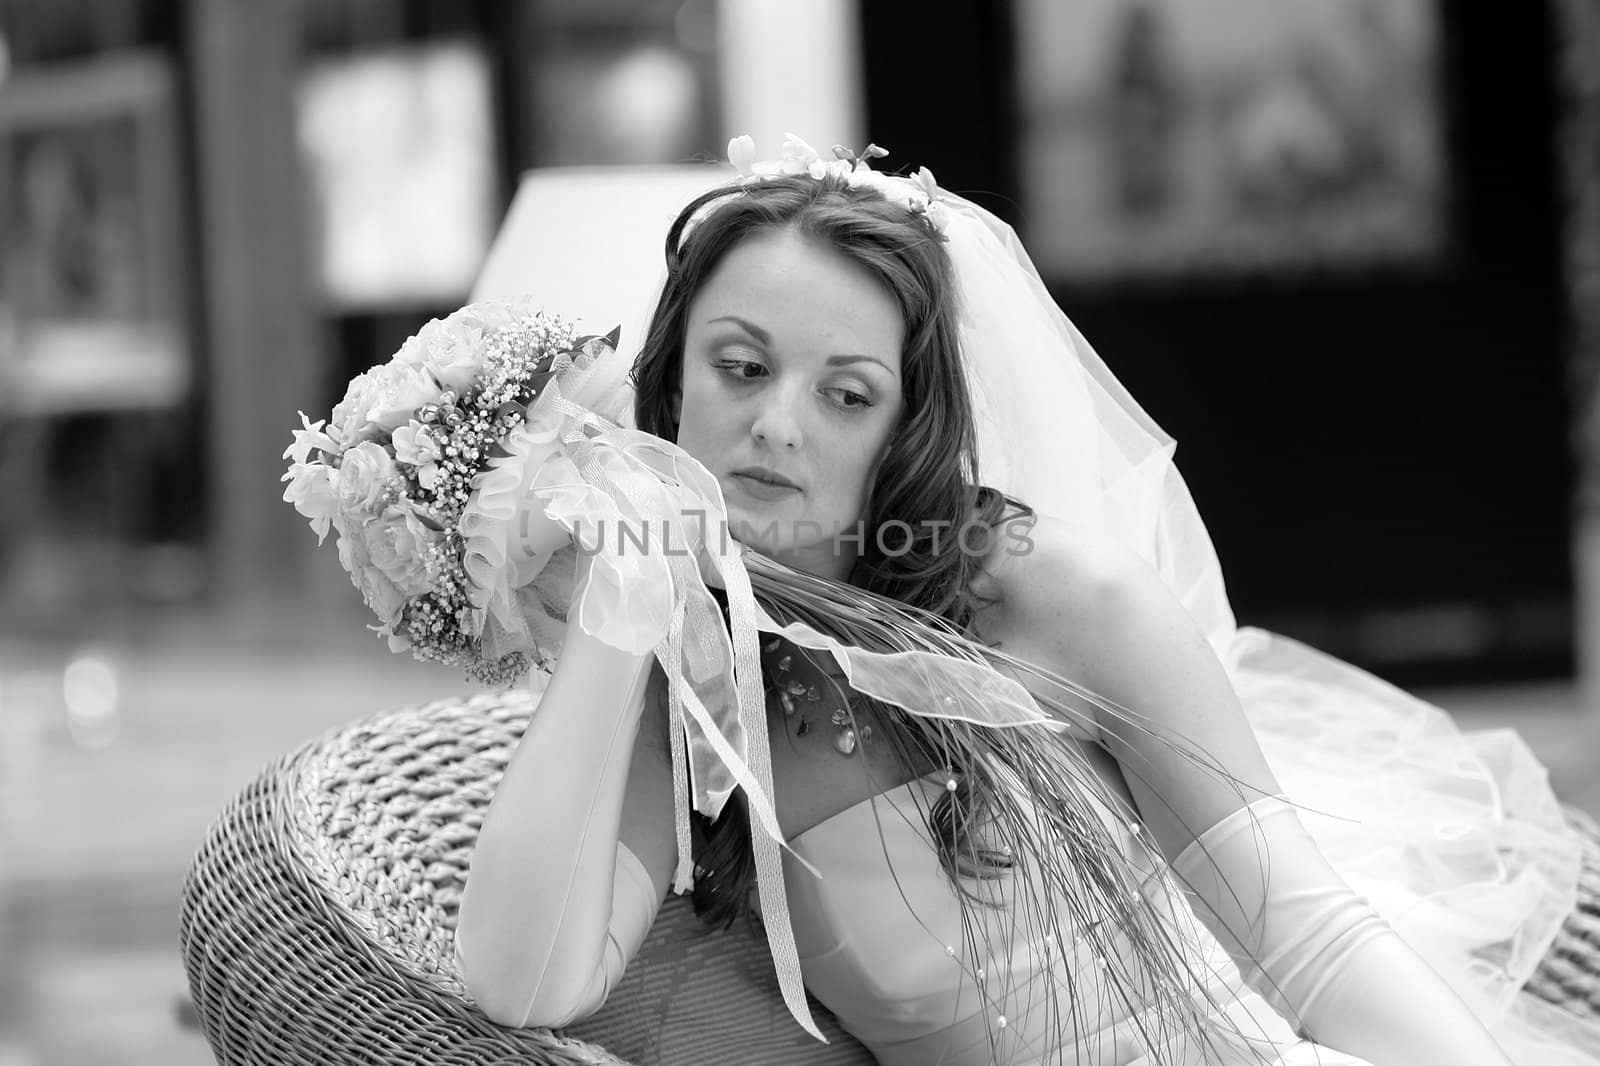 Pensive young bride by speedfighter